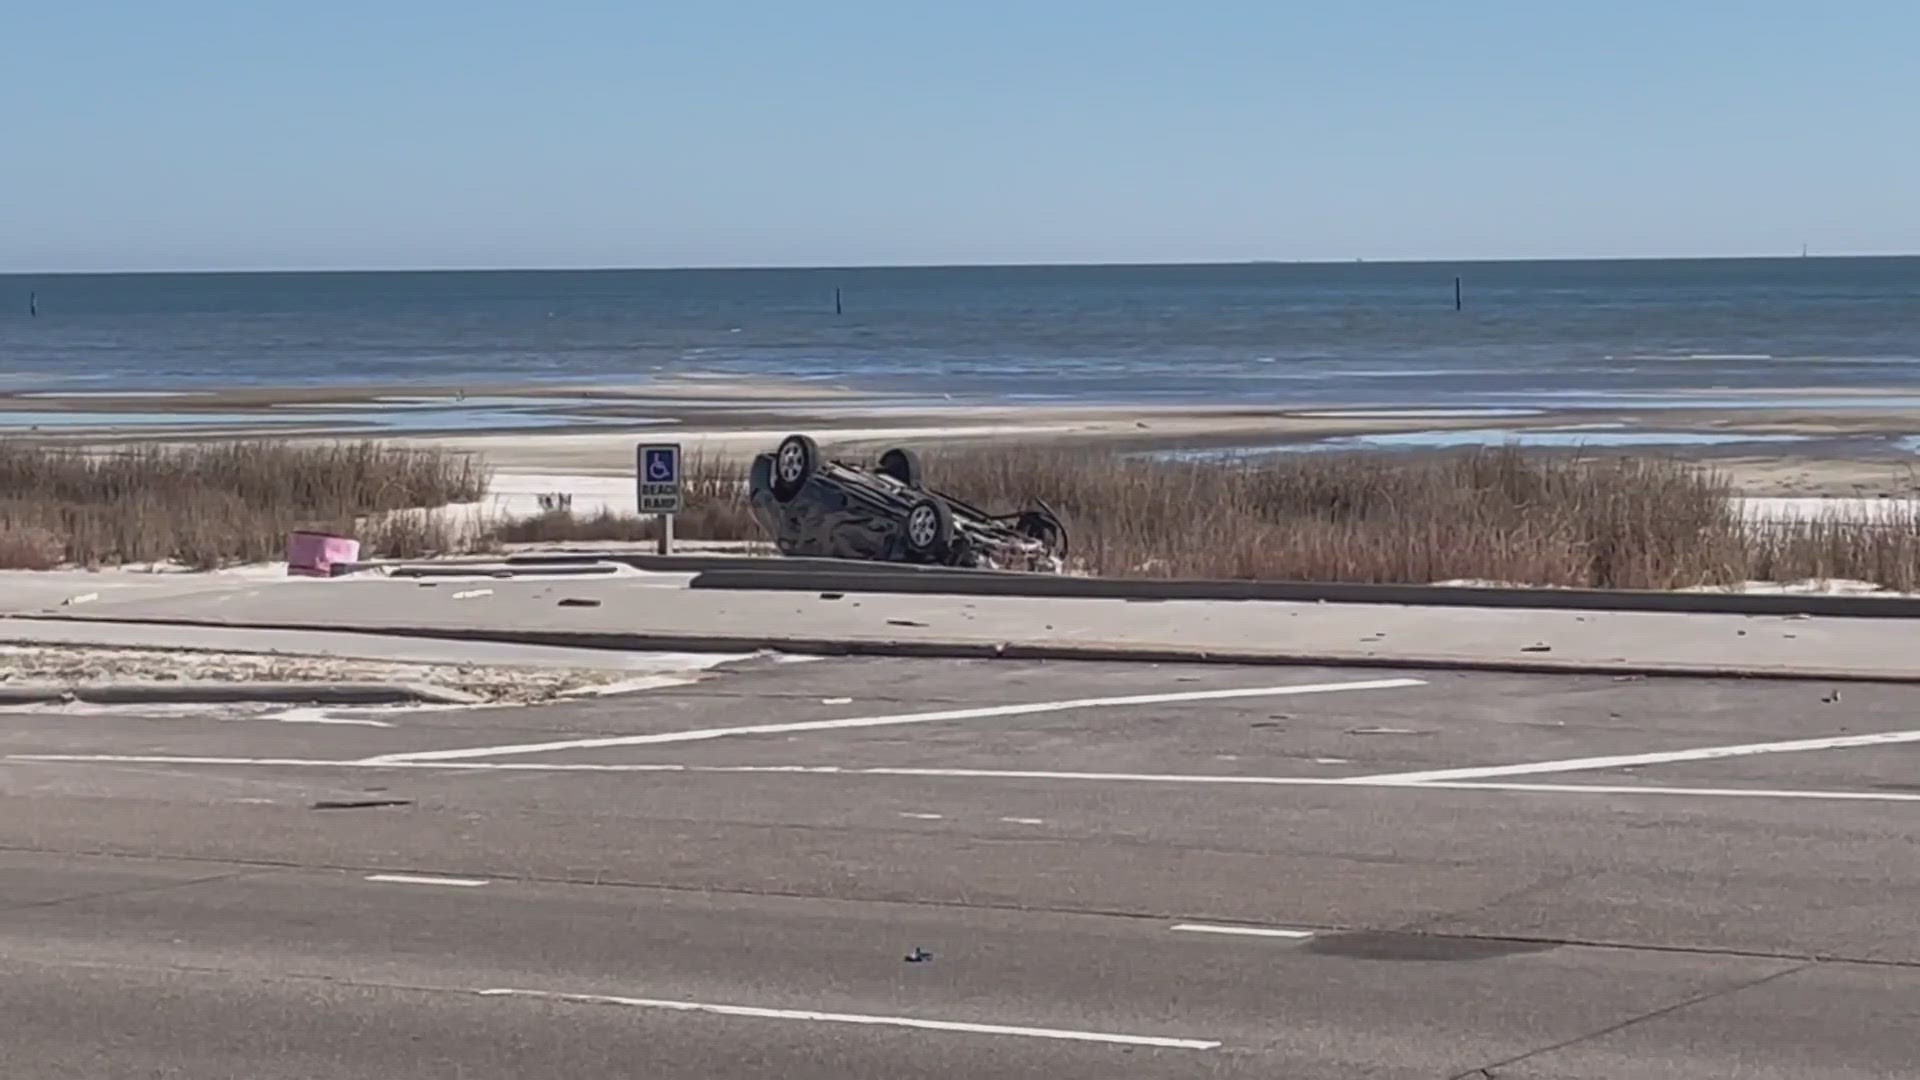 The victim was on the boardwalk at the time he was fatally struck by the suspects' vehicle...